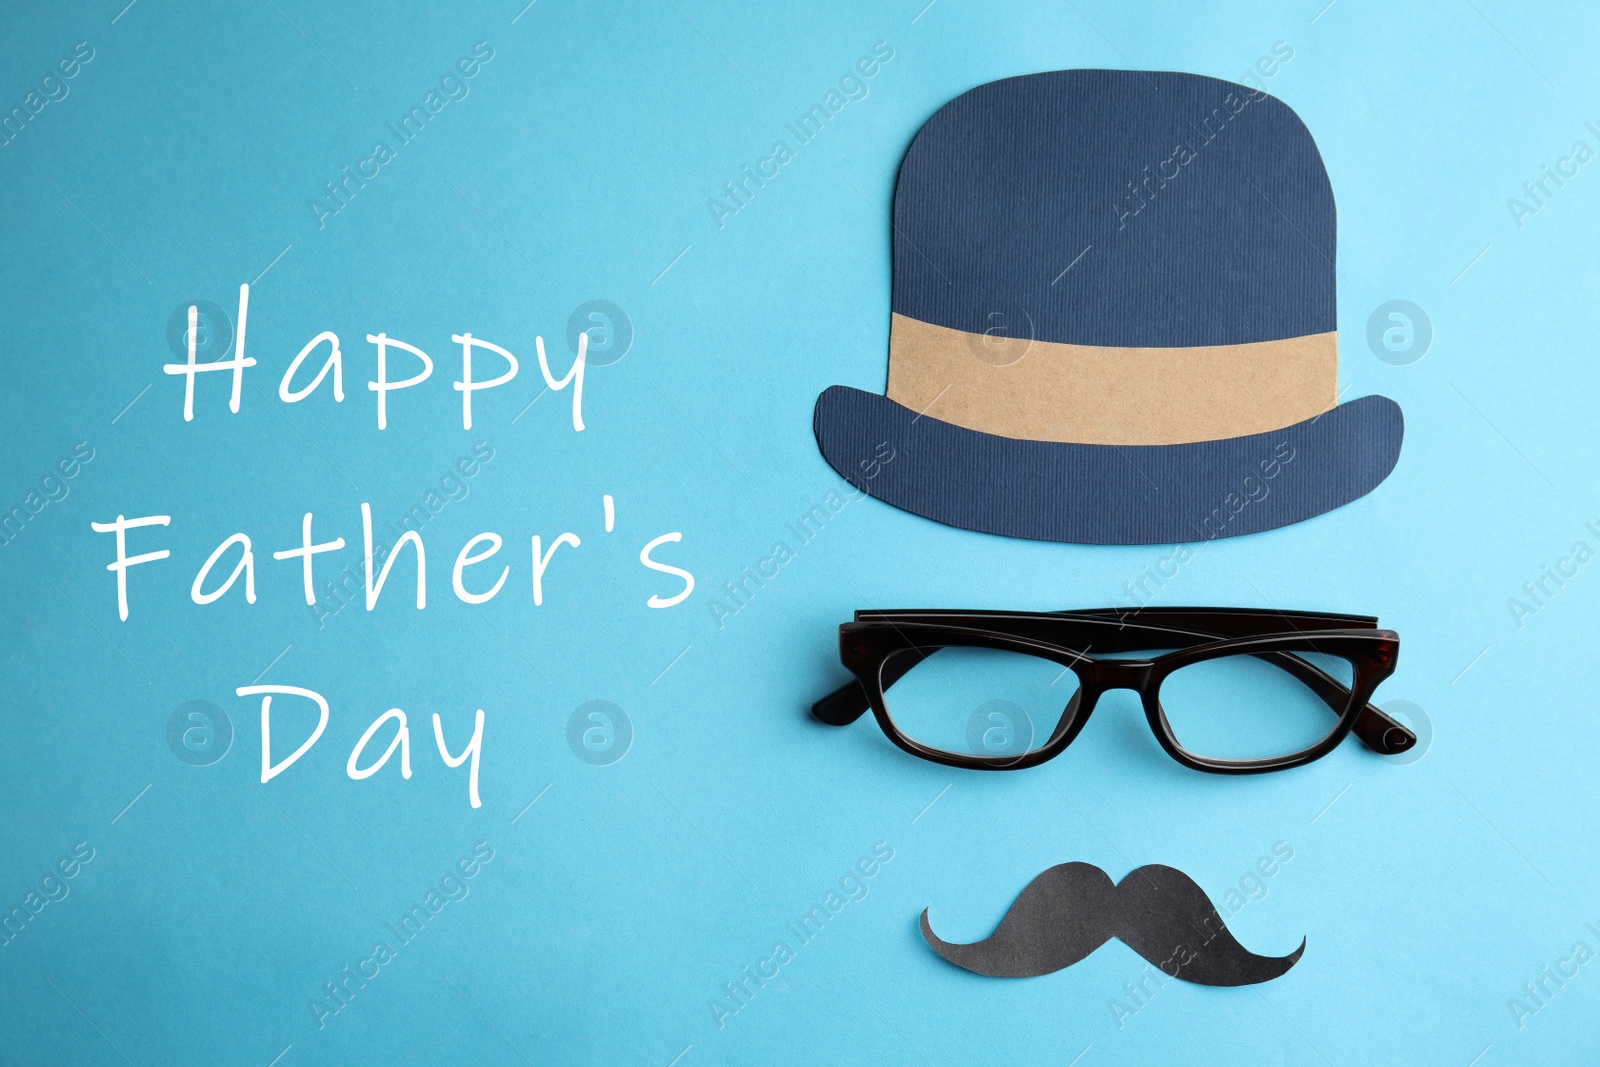 Image of Eyeglasses, paper mustache and hat on light blue background, flat lay. Happy father's day